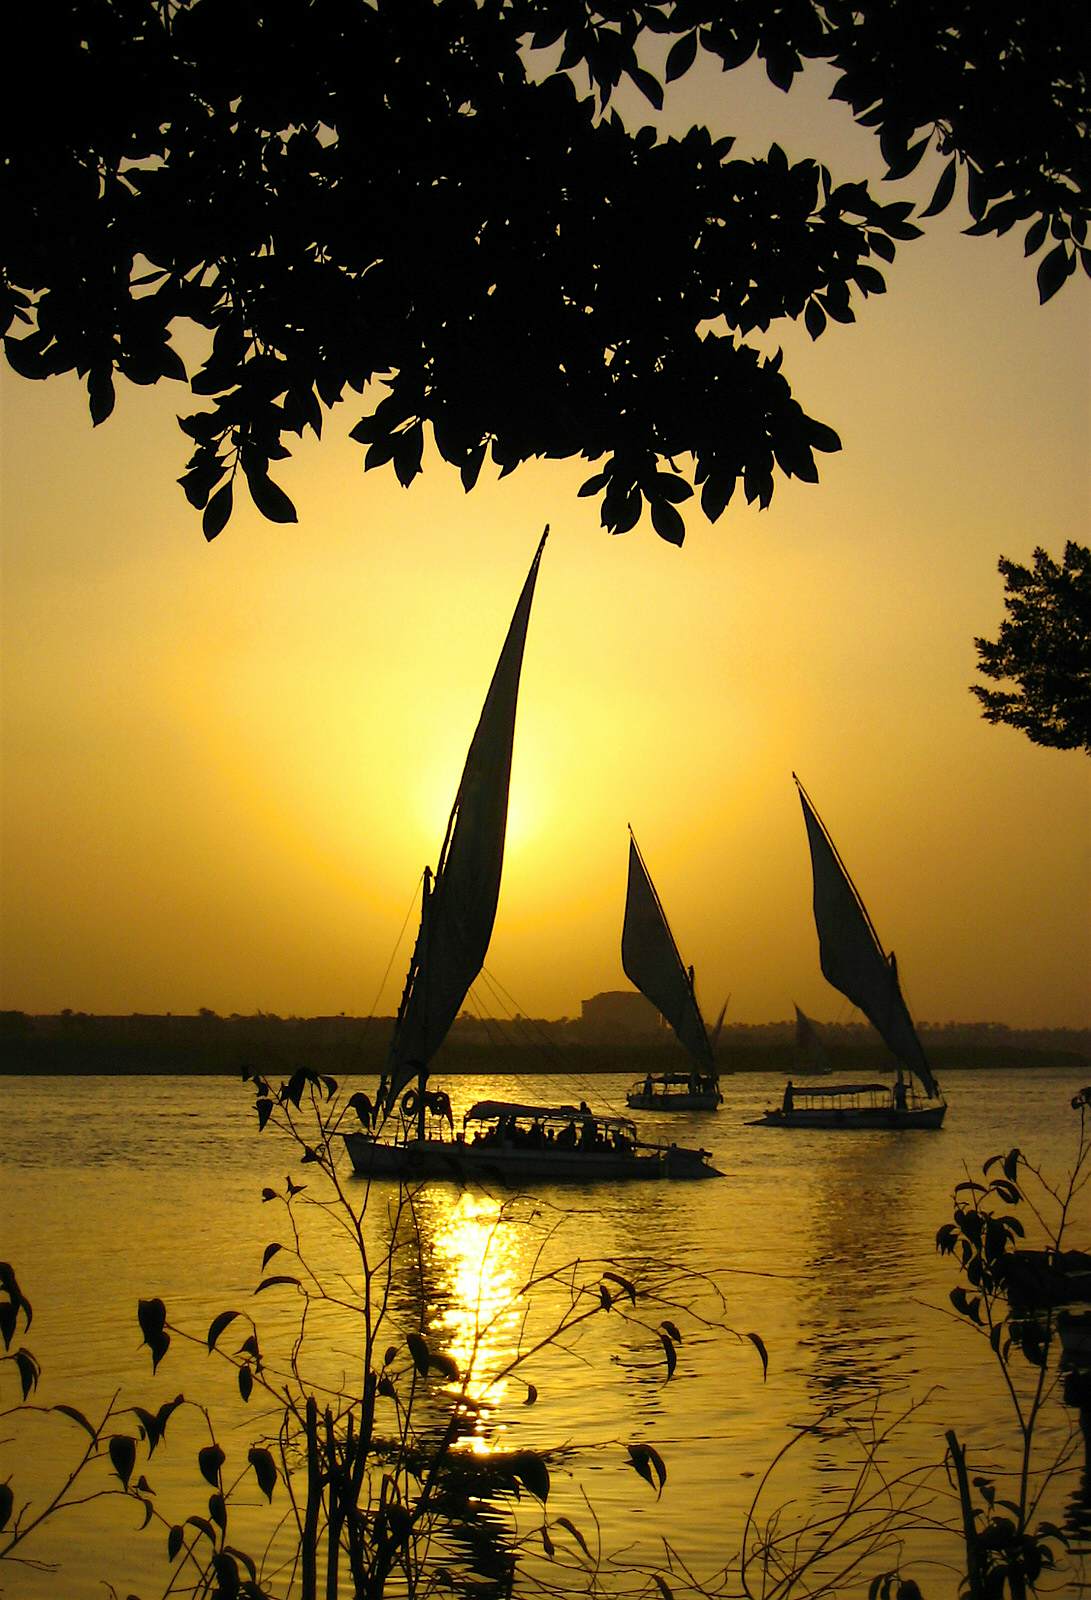 Sailing at sunset on the Nile near Cairo